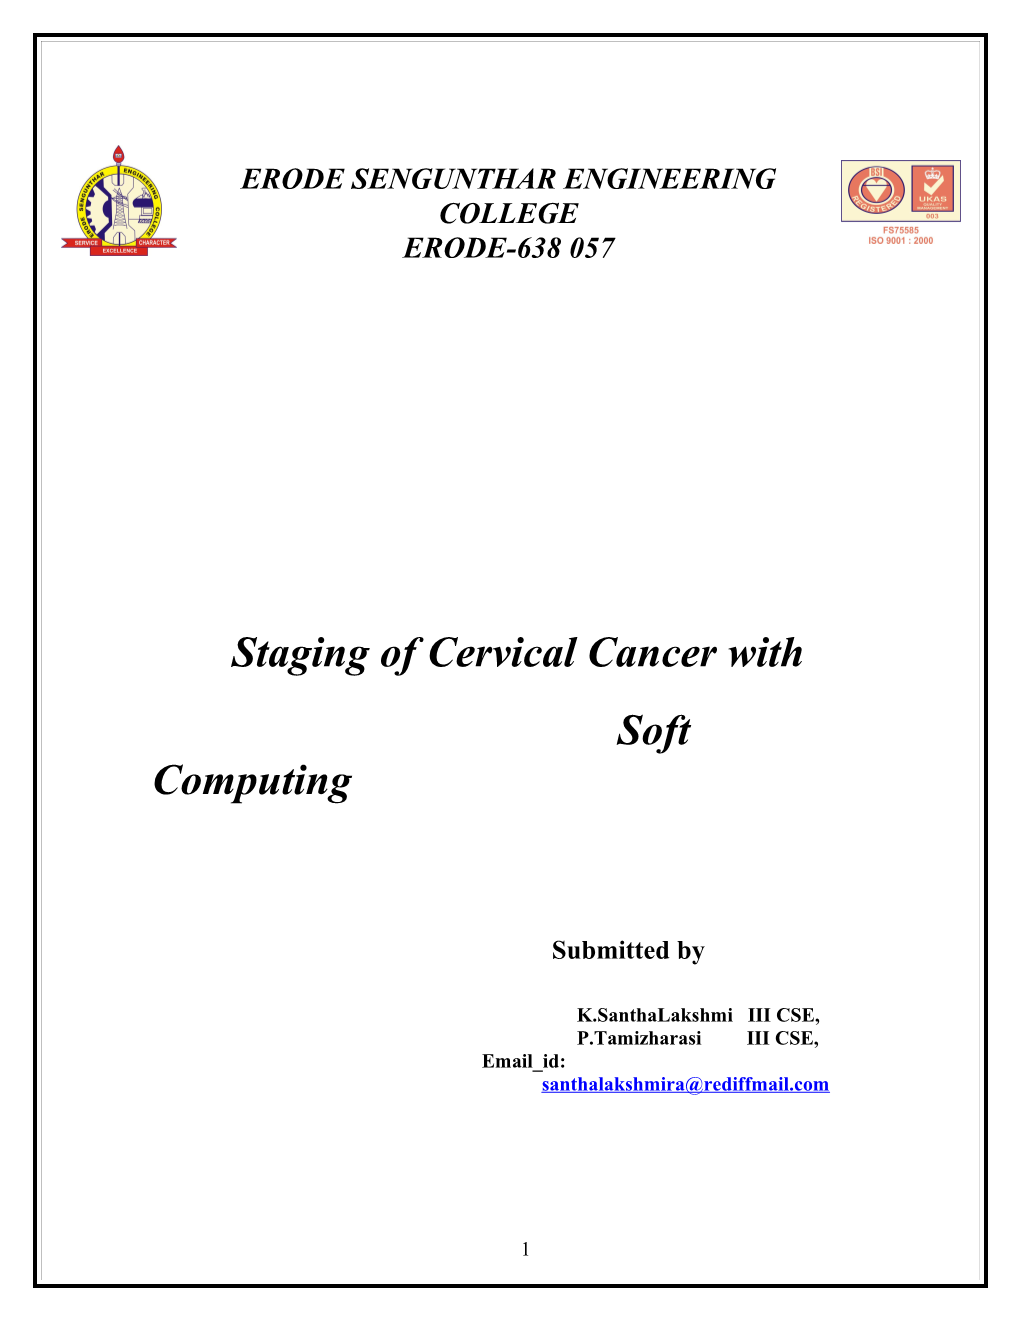 Staging of Cervical Cancer With